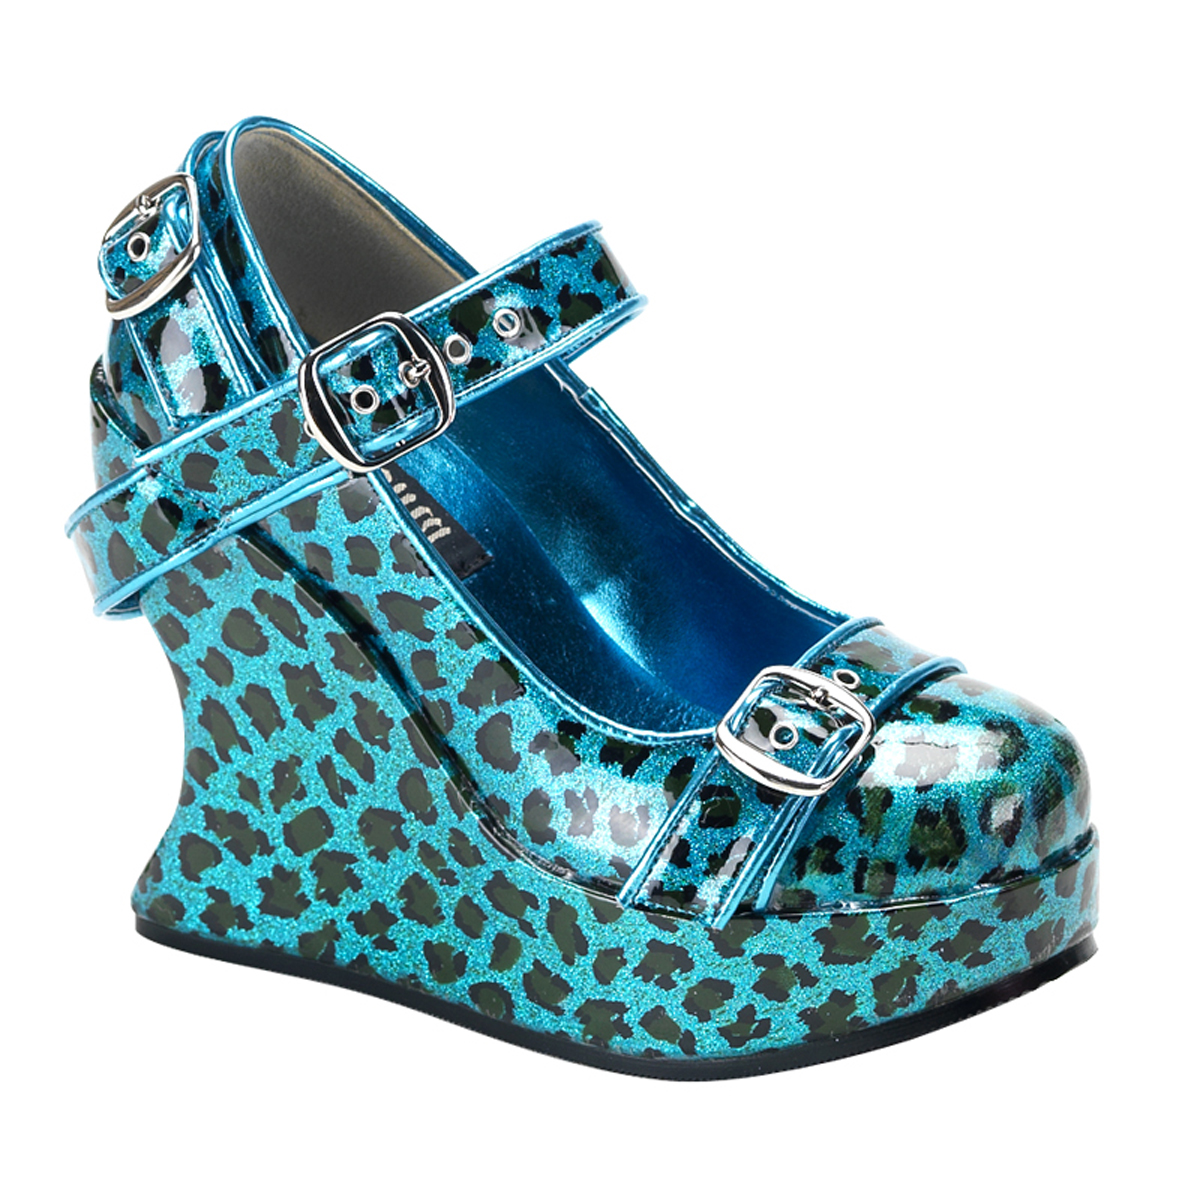 turquoise wedges